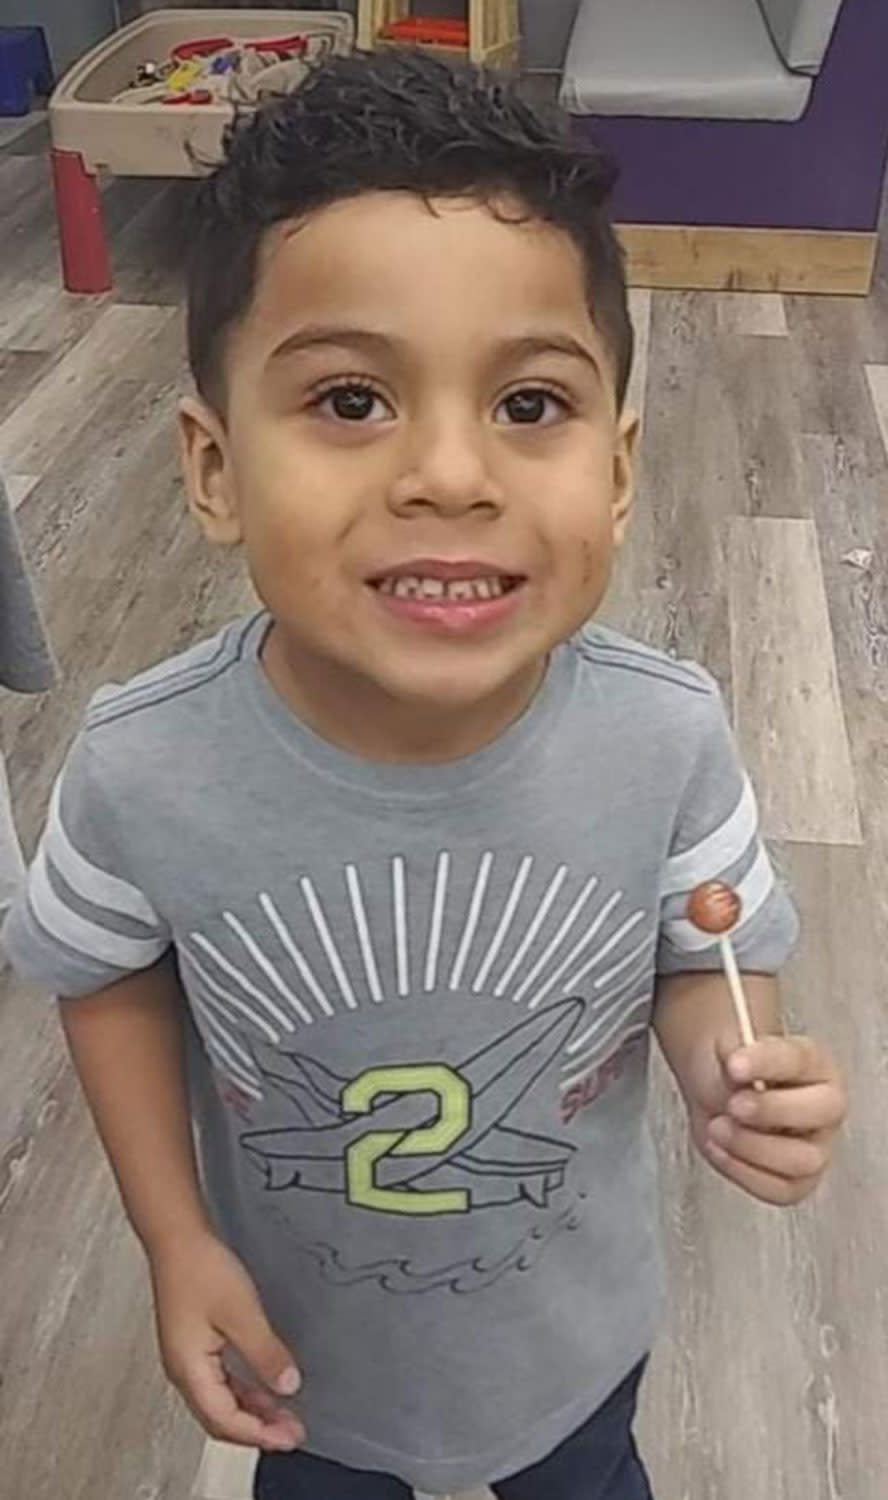 Texas Boy, 3, Killed in Hit-and-Run as Police Search for Suspect